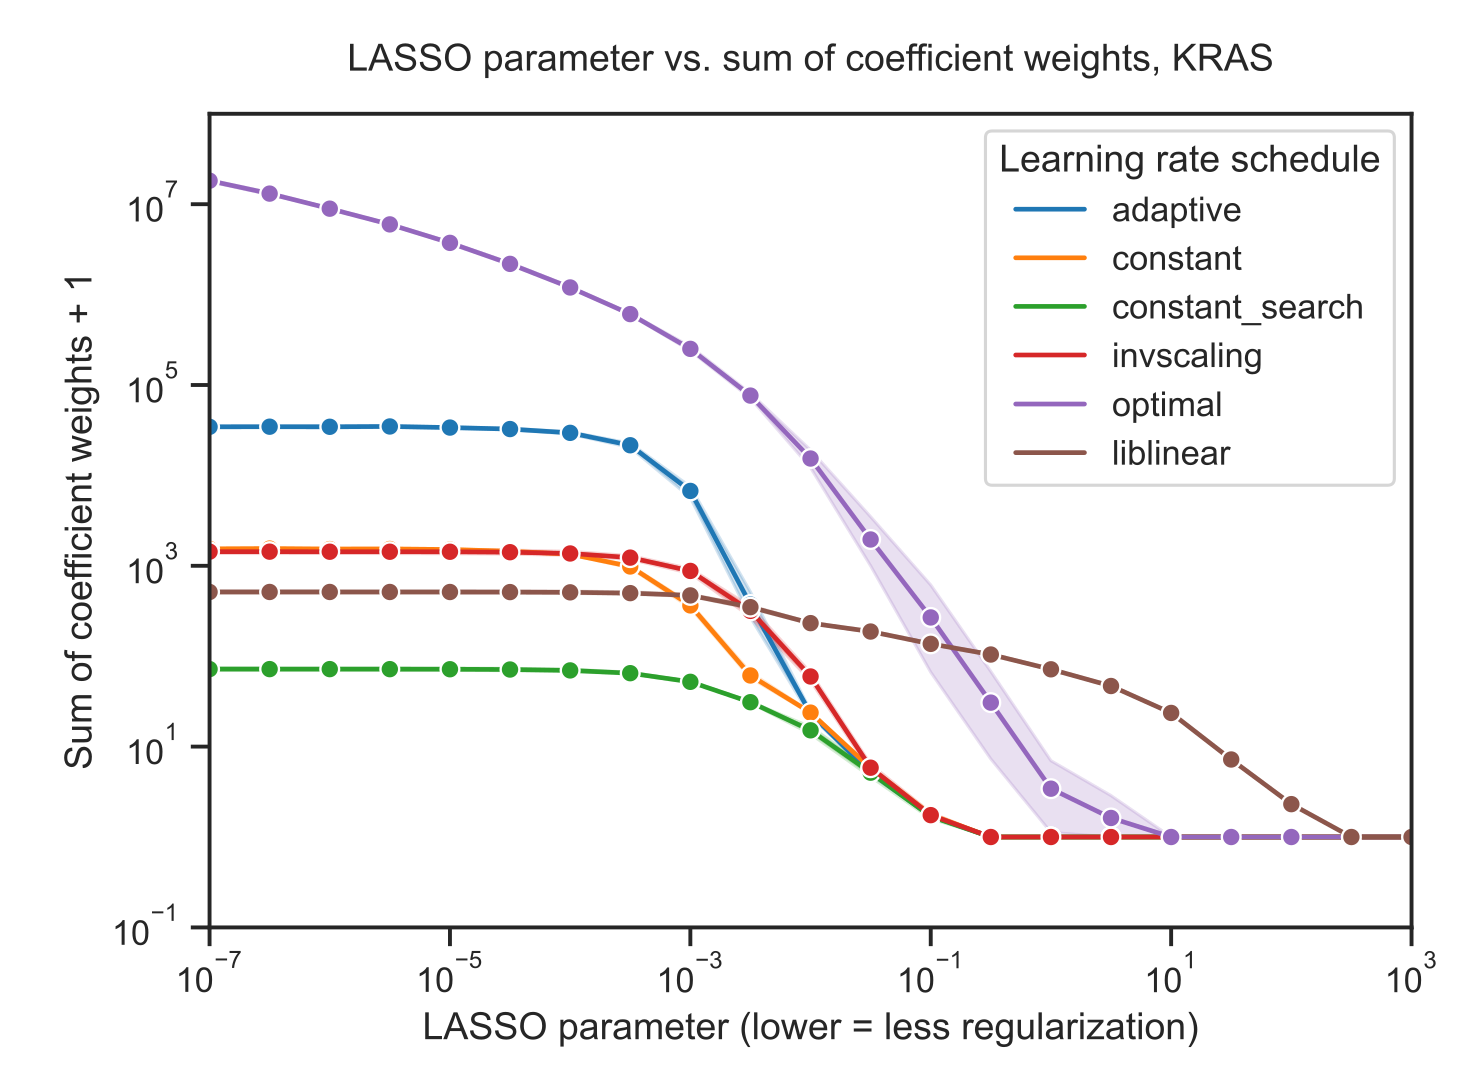 Figure S3: Sum of absolute value of coefficients + 1 for KRAS mutation prediction using SGD and liblinear optimizers, with varying learning rate schedules for SGD. Similar to the figures in the main paper, the liblinear x-axis represents the inverse of the C regularization parameter; SGD x-axes represent the untransformed \alpha parameter.